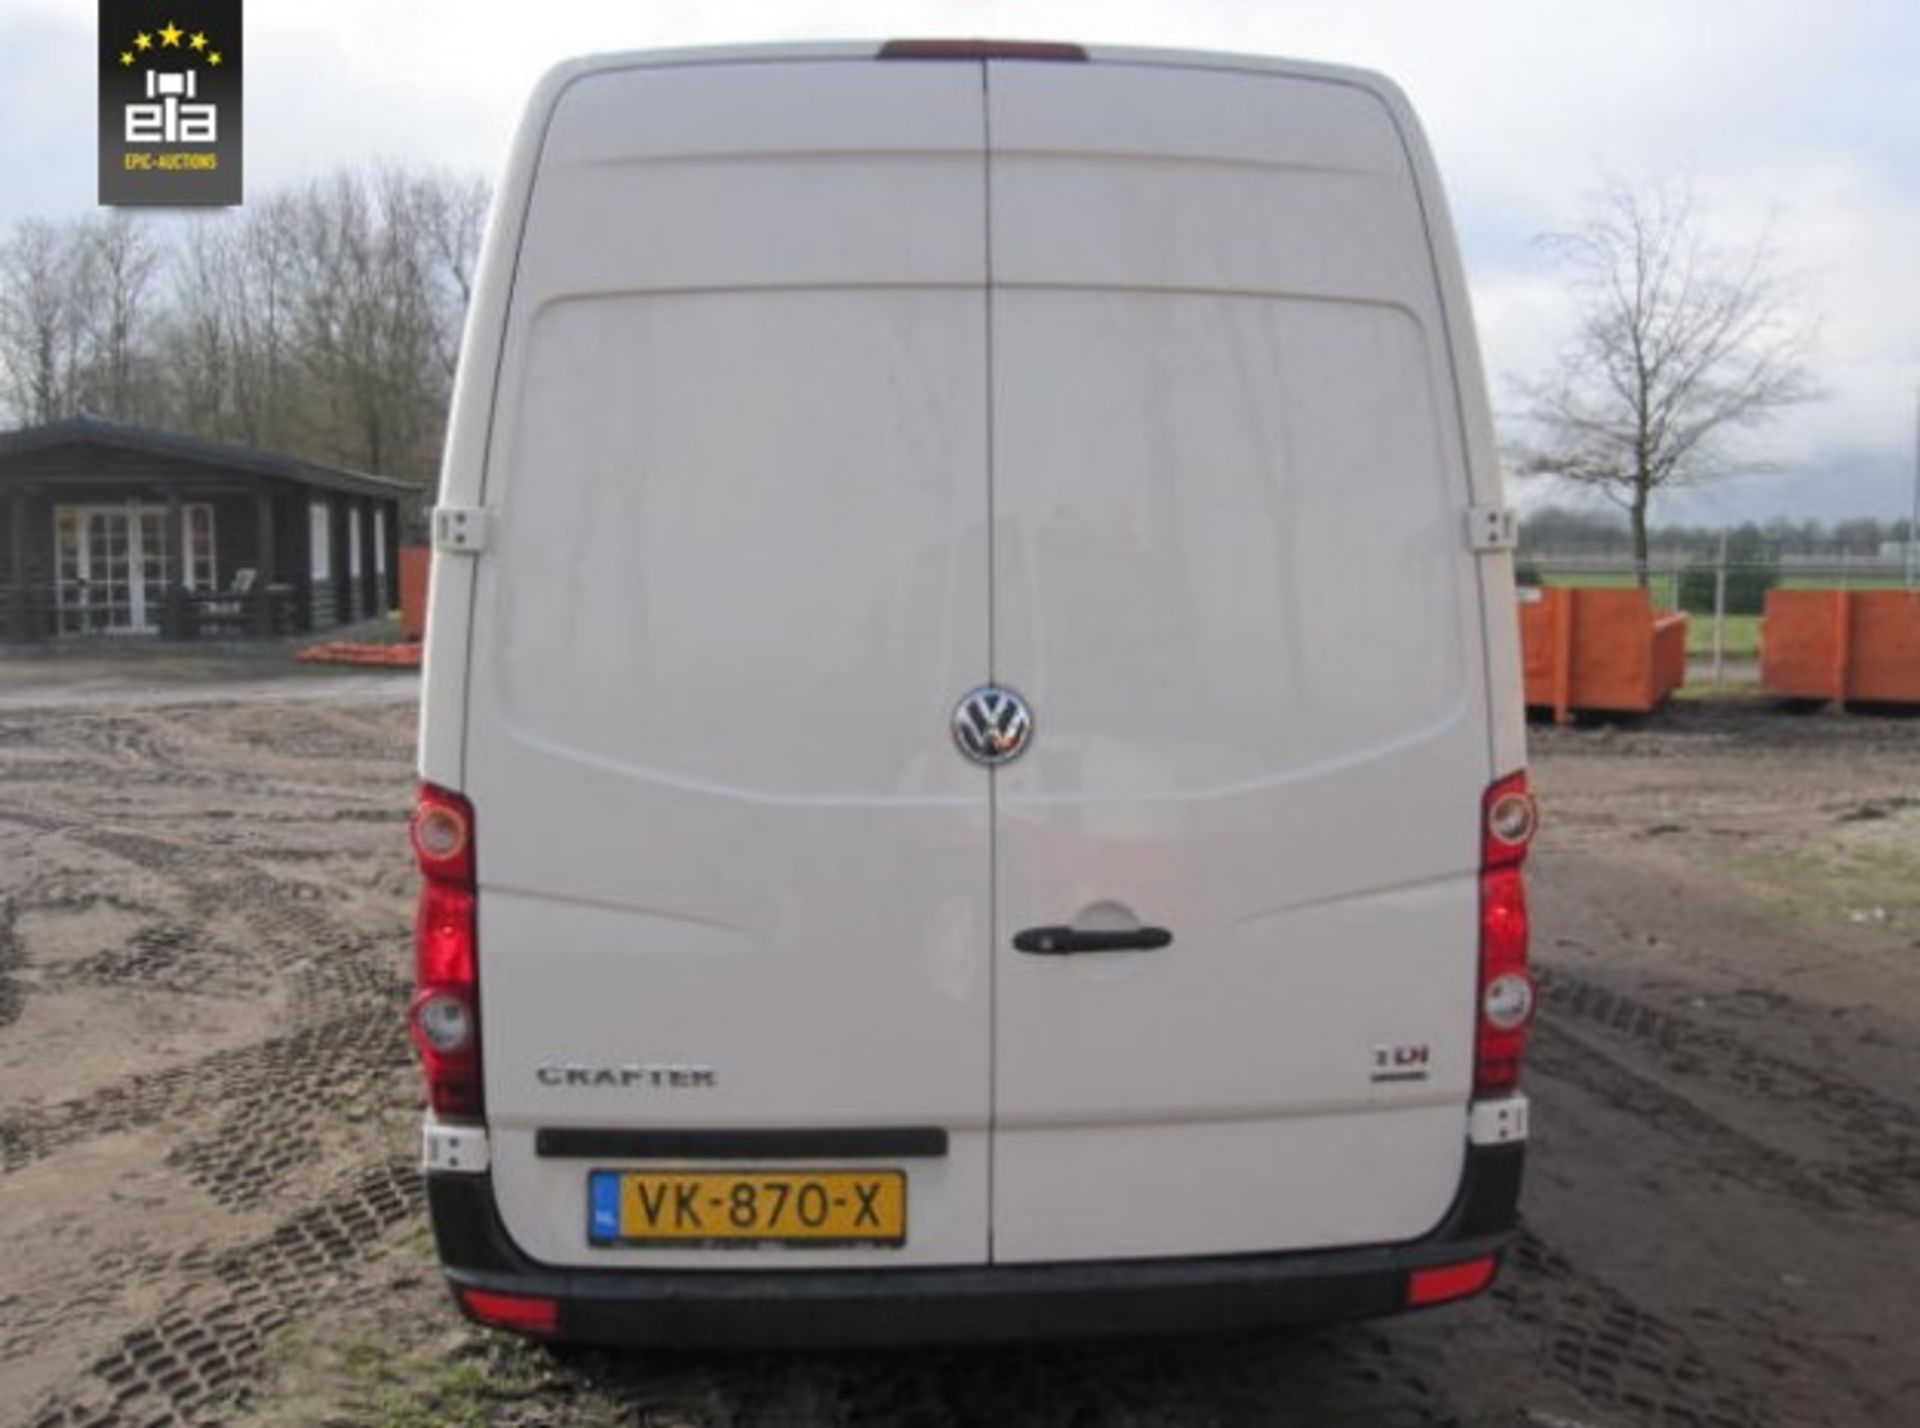 2011 Volkswagen Crafter 2.5 TDI L2H2 20151051 - Image 4 of 26